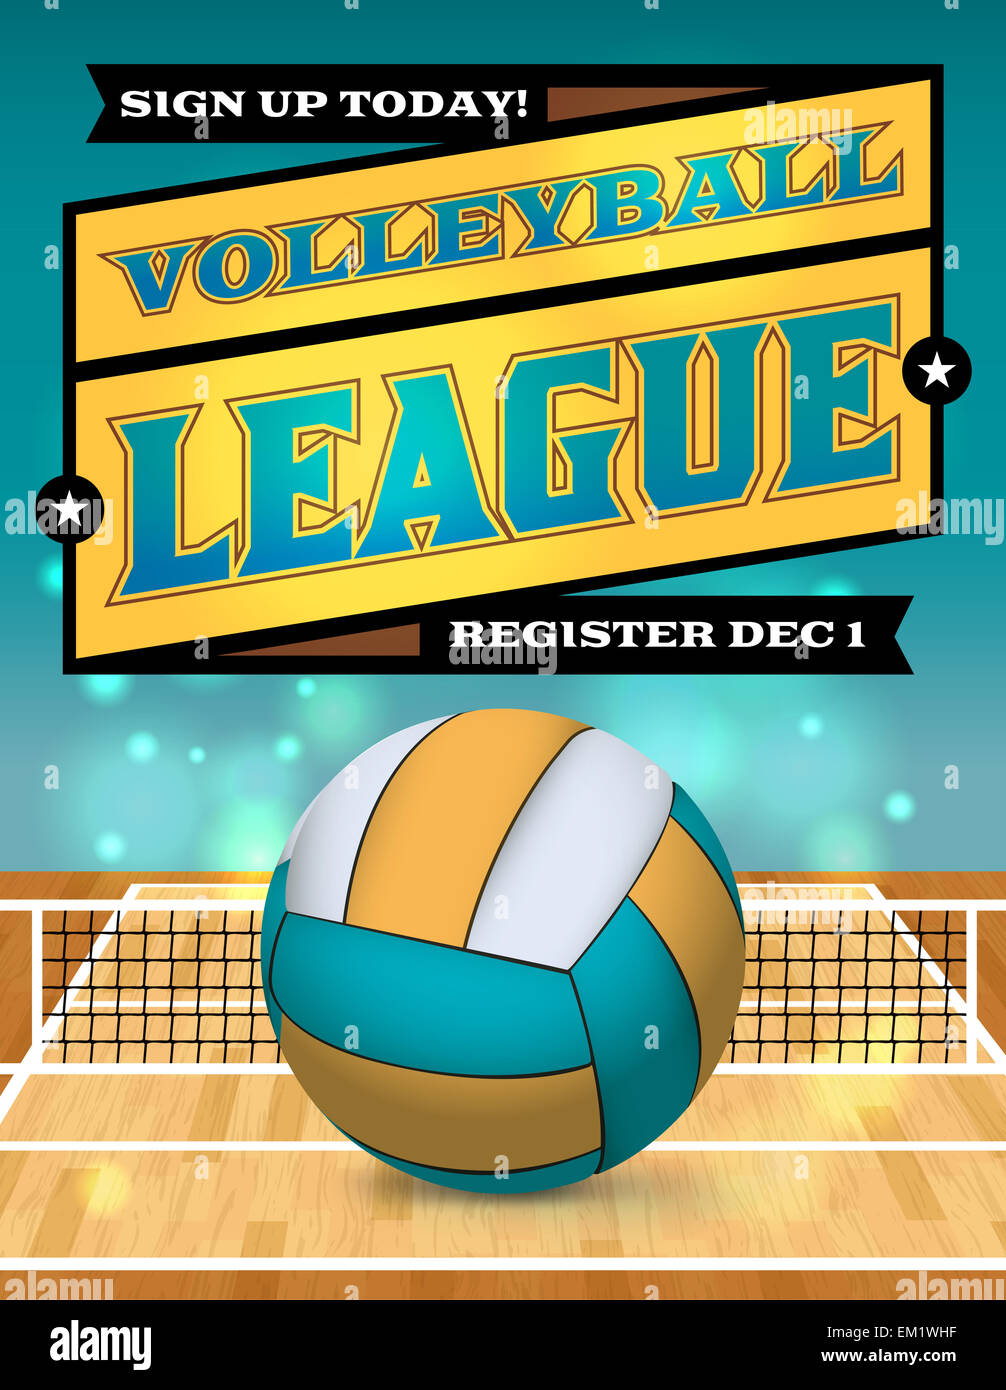 An illustration for a volleyball league flyer or poster. Stock Photo